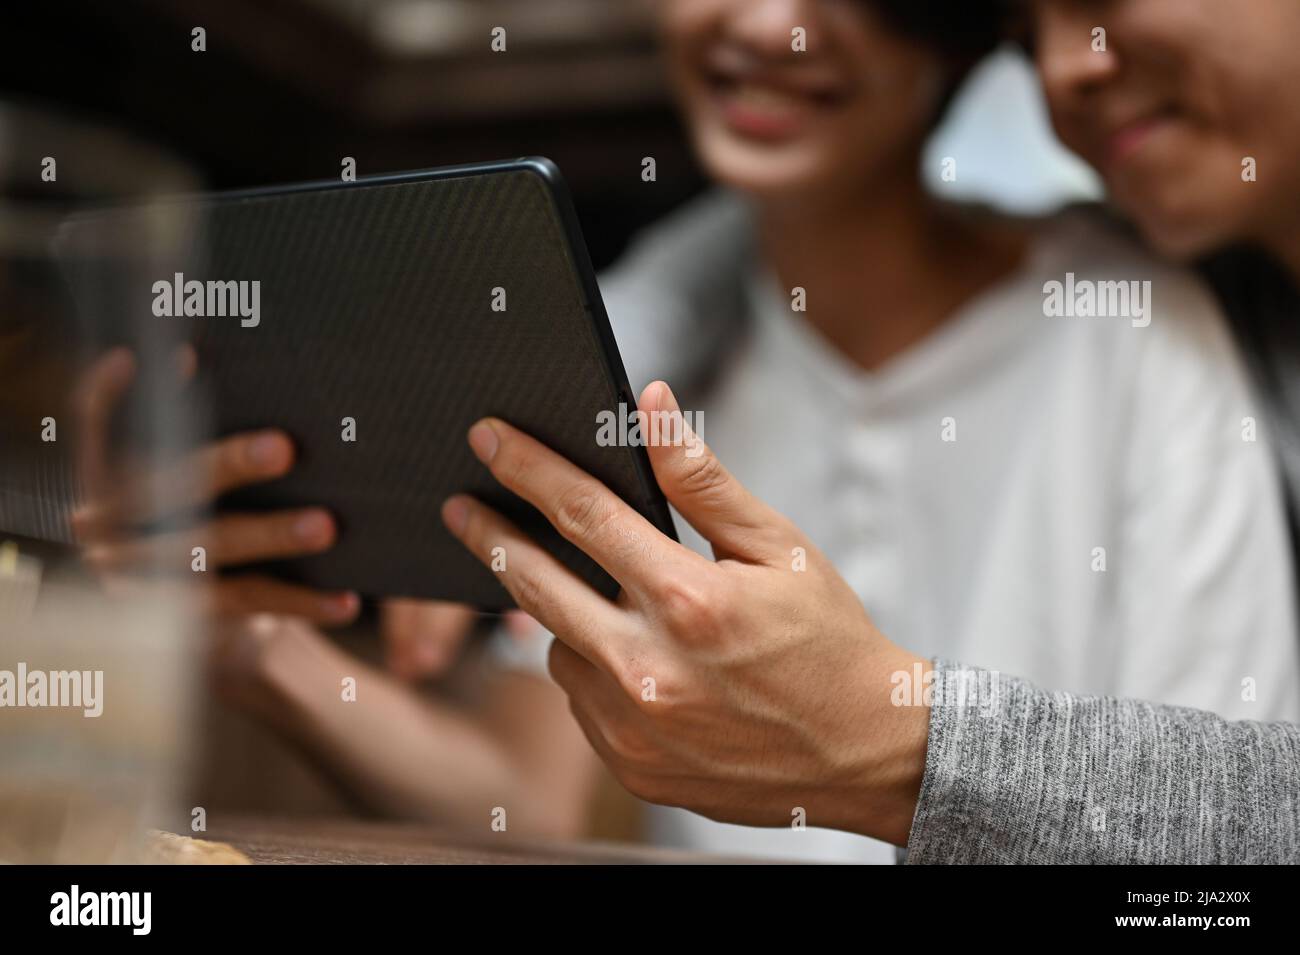 Close-up image, Teenage gay couples enjoy watching a movie together on digital tablet at home. LGBT couples concept Stock Photo